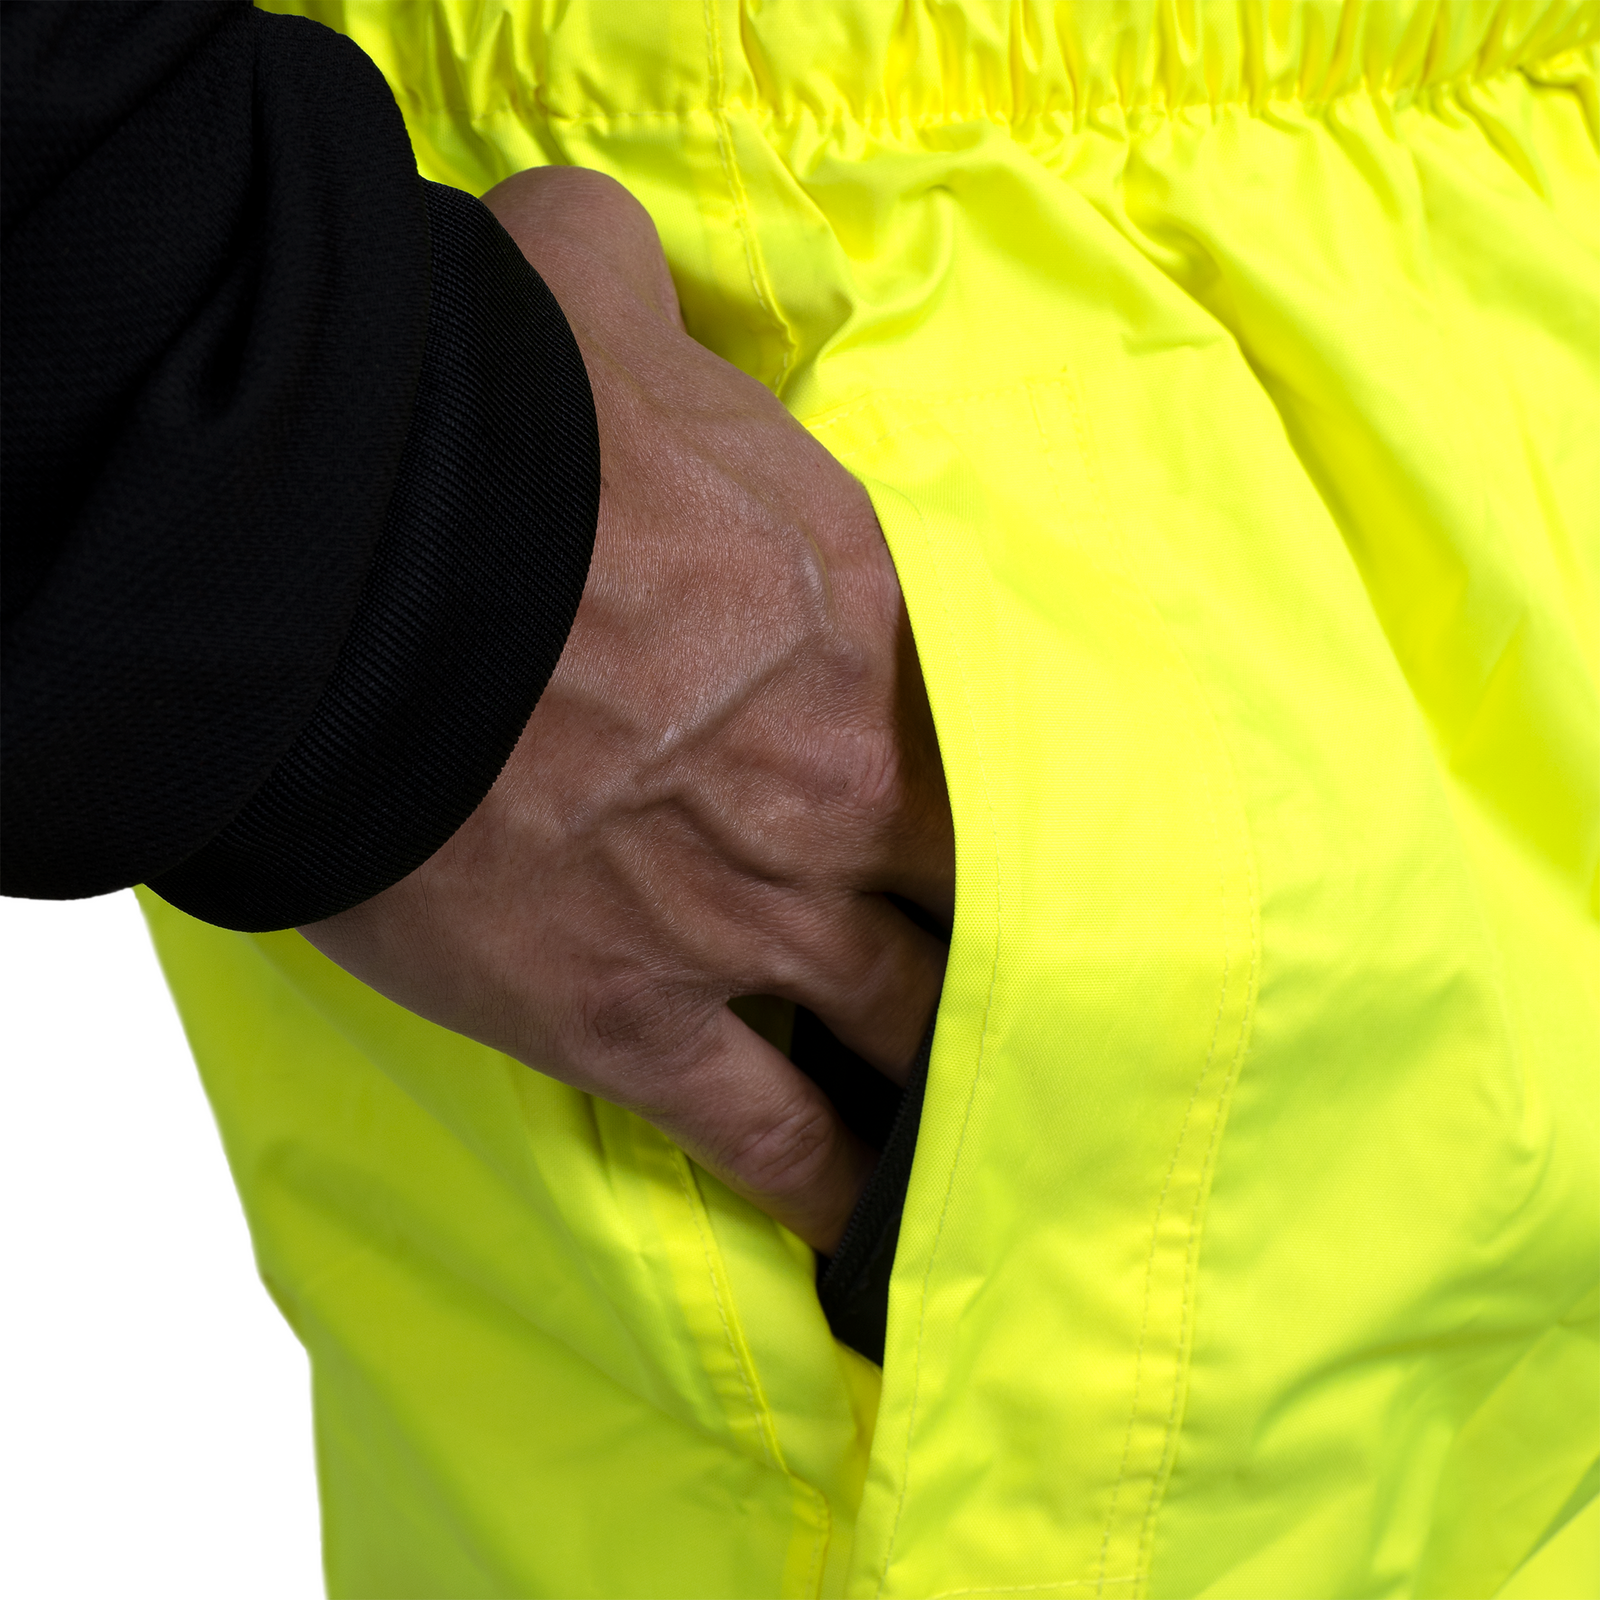 A person inserting his hand into the opening of the hi visibility safety rain pant to reach the pocket of the pant underneath